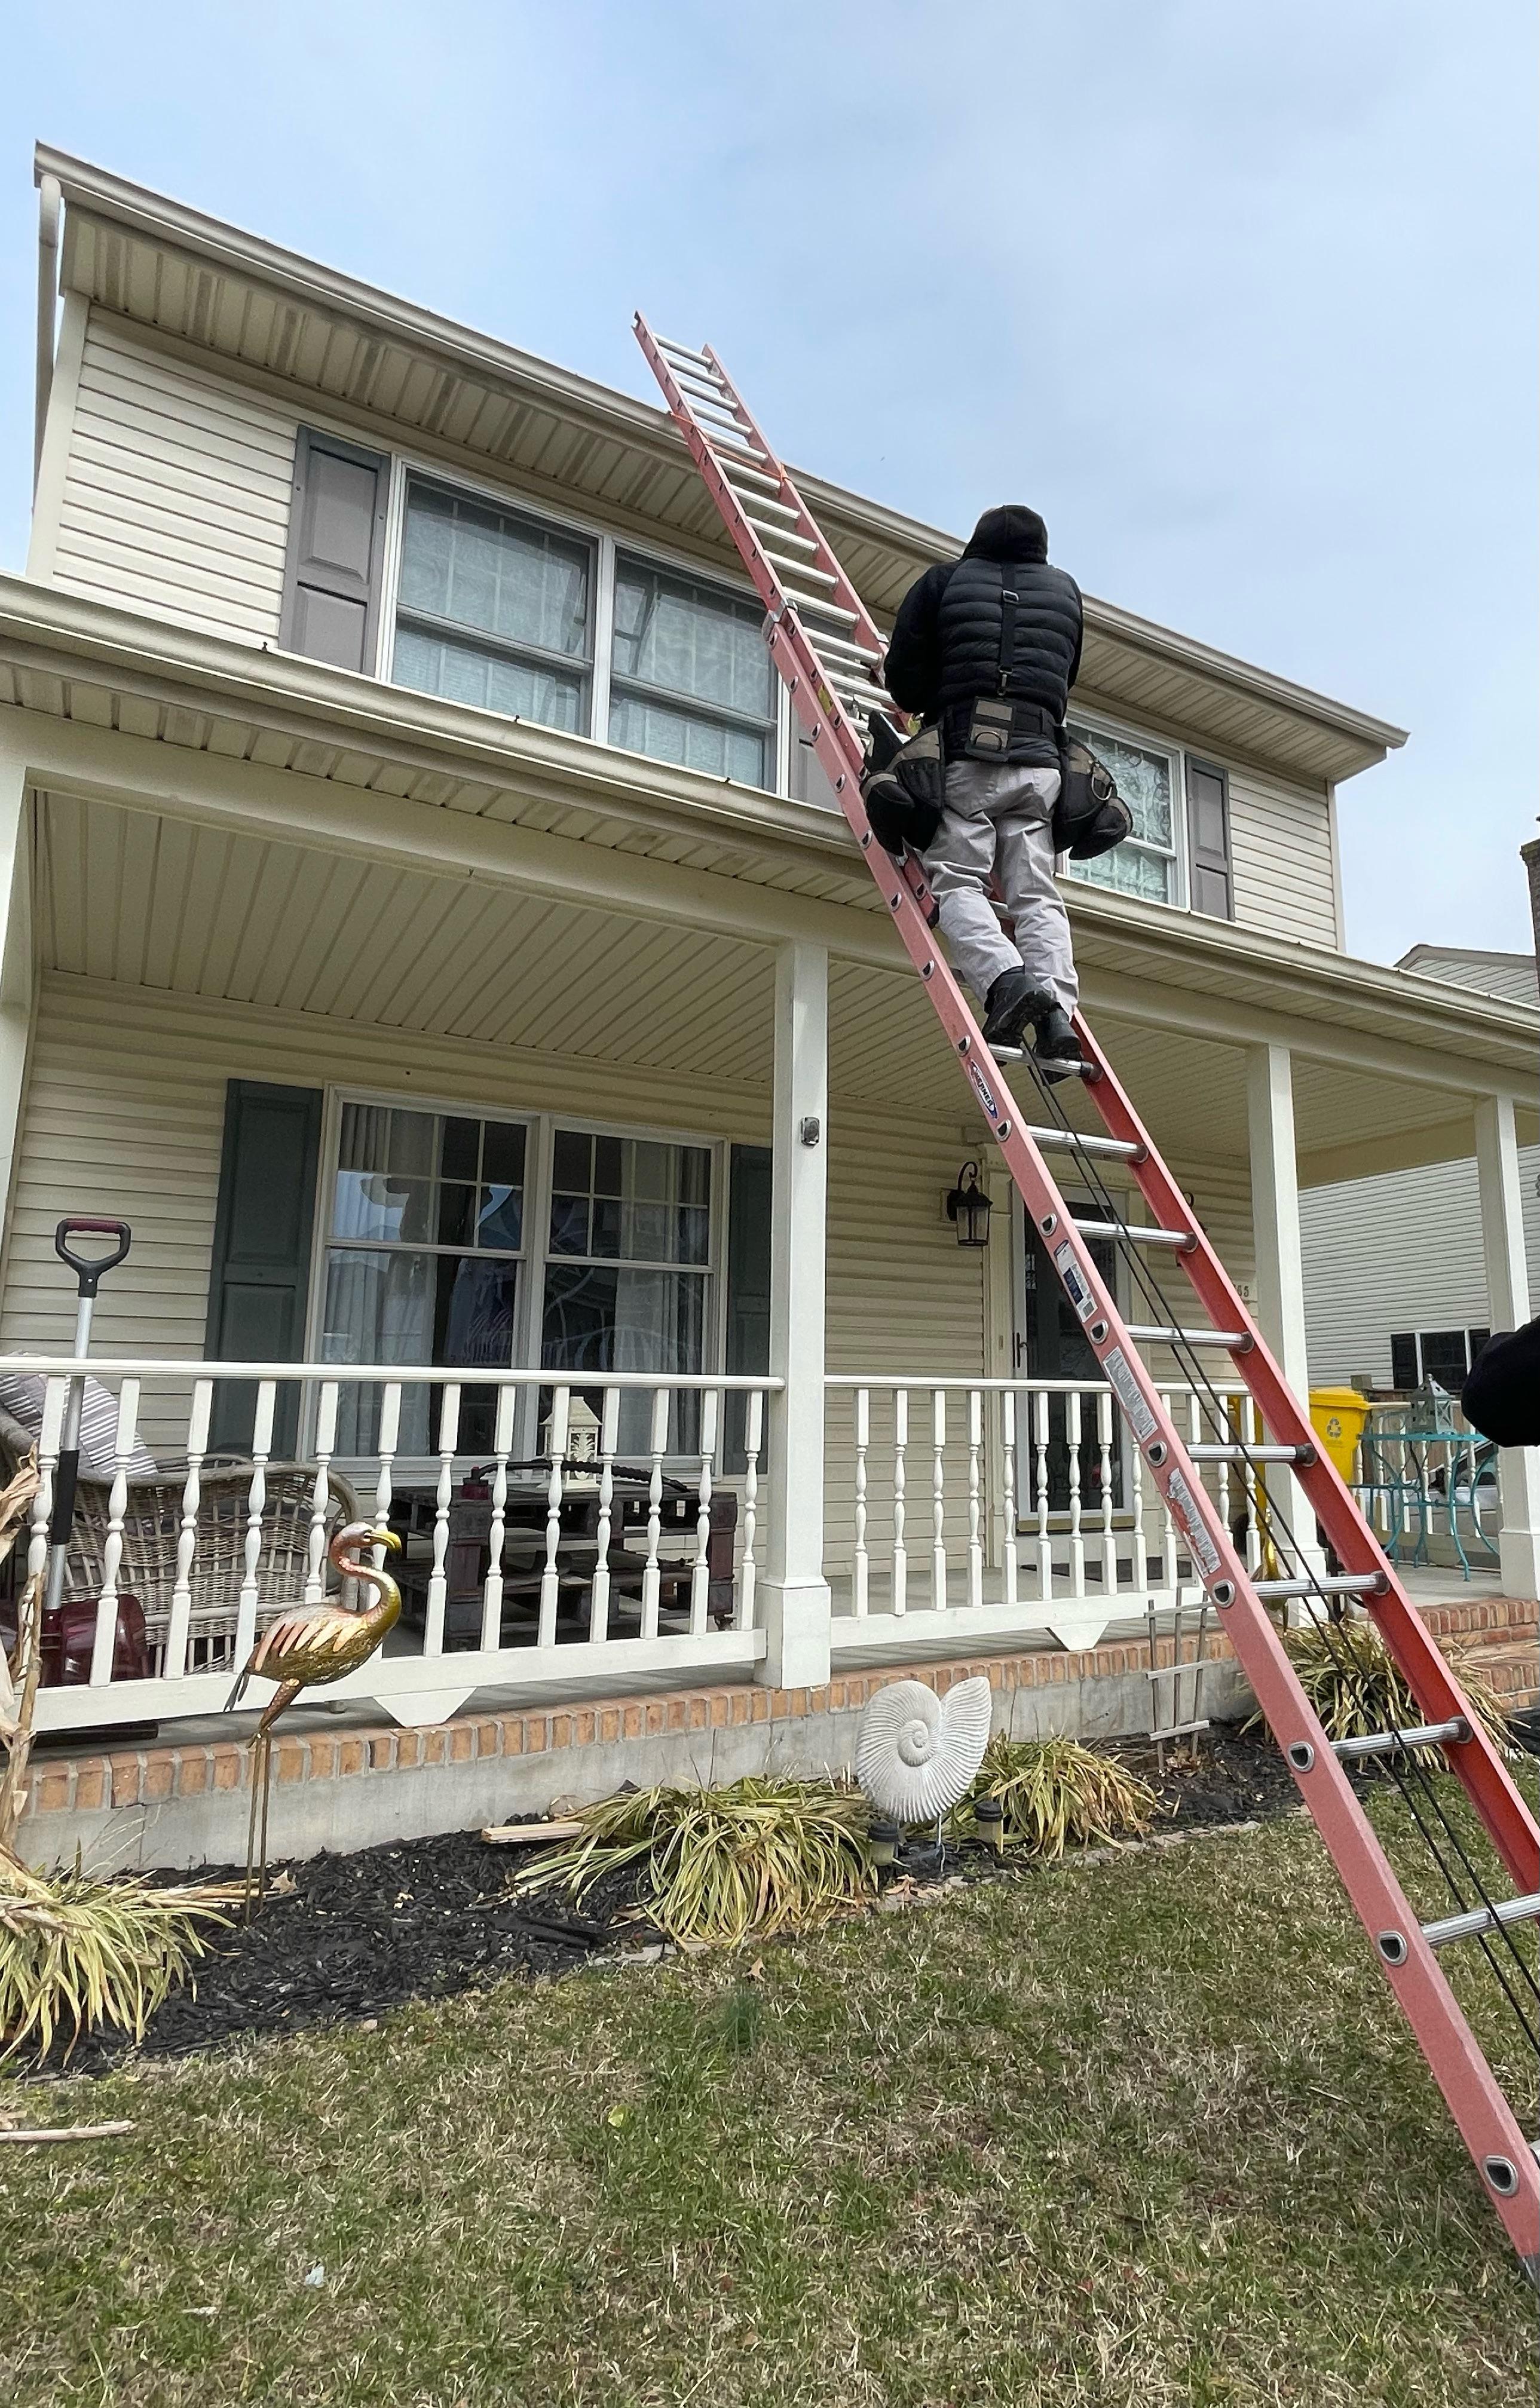 Has your insurance company sent out an adjuster to inspect your house for storm damage yet?